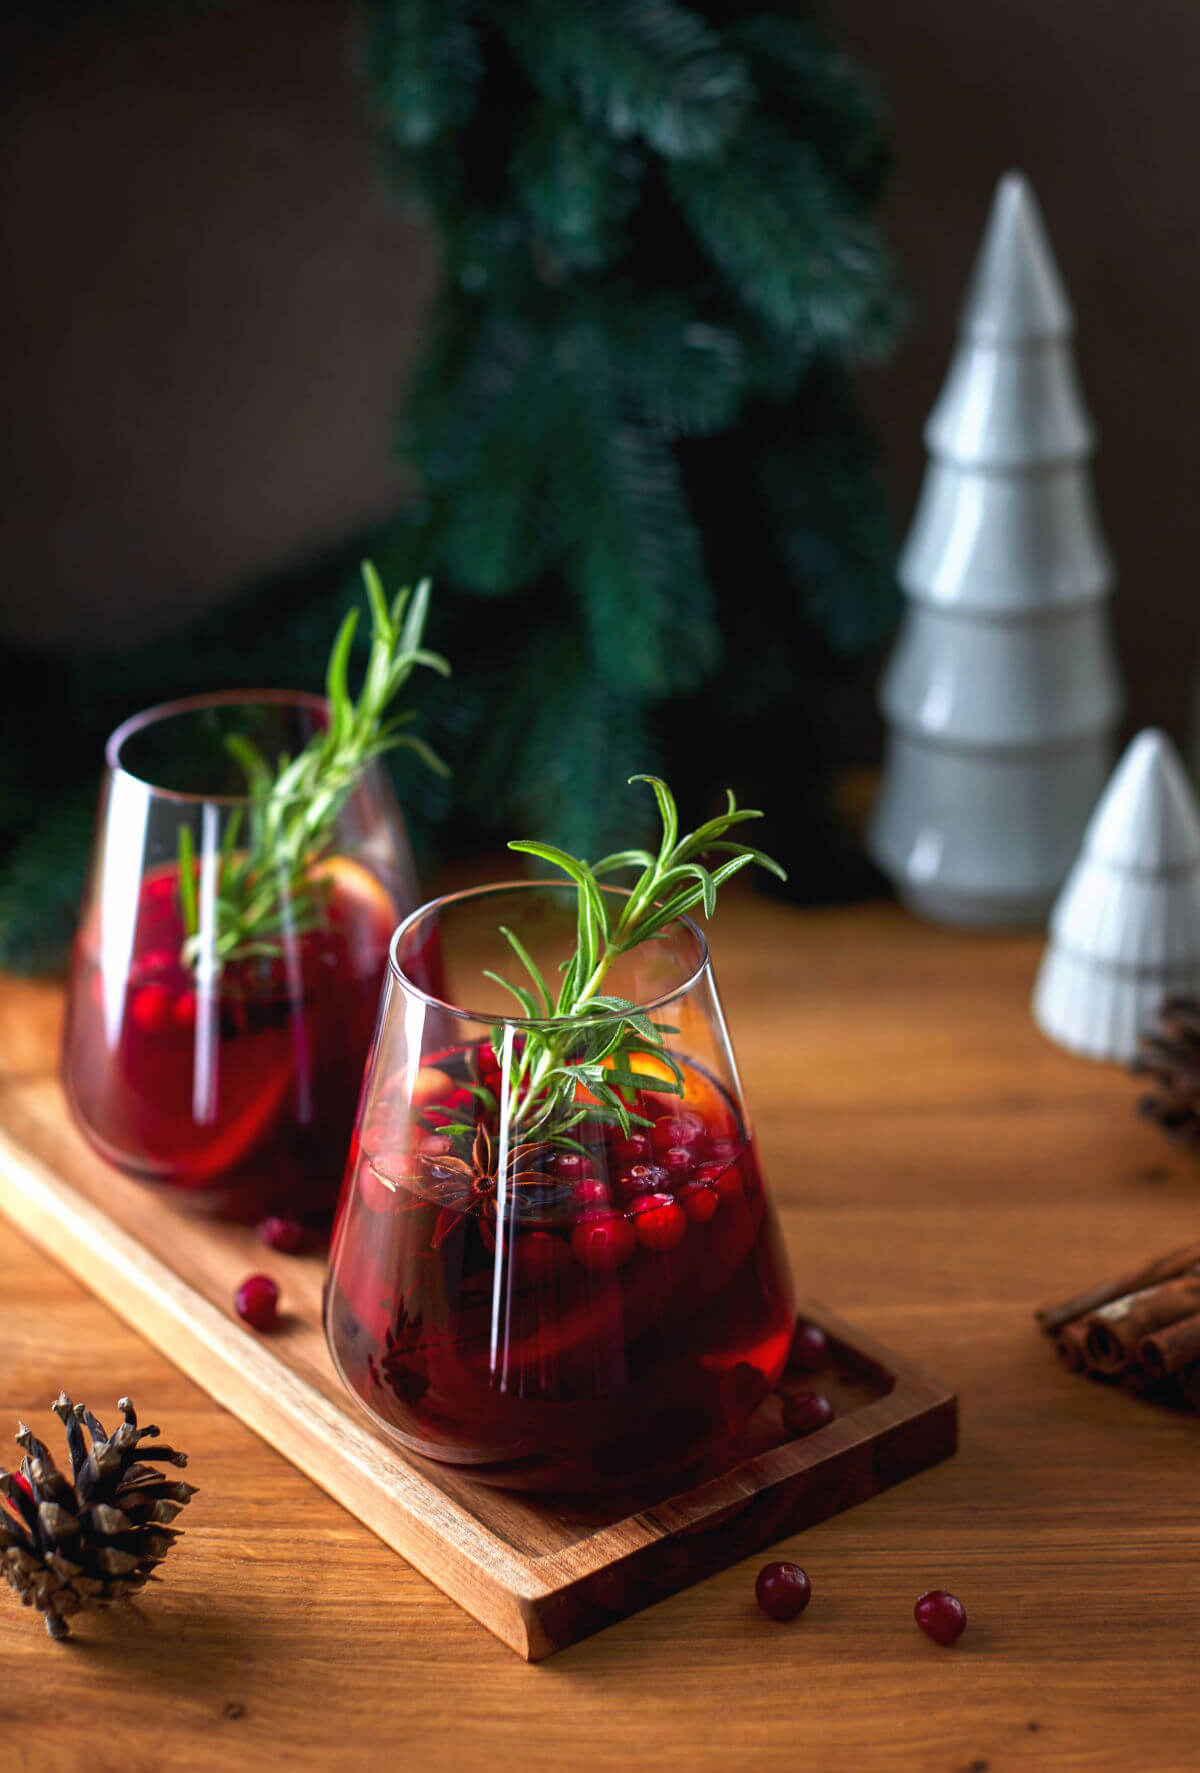 A beautiful photo of two stemless wine glasses filled with a holiday drink made with red wine, rosemary, orange, and cranberries. A wreath and silver Christmas tree decorations in the background. 